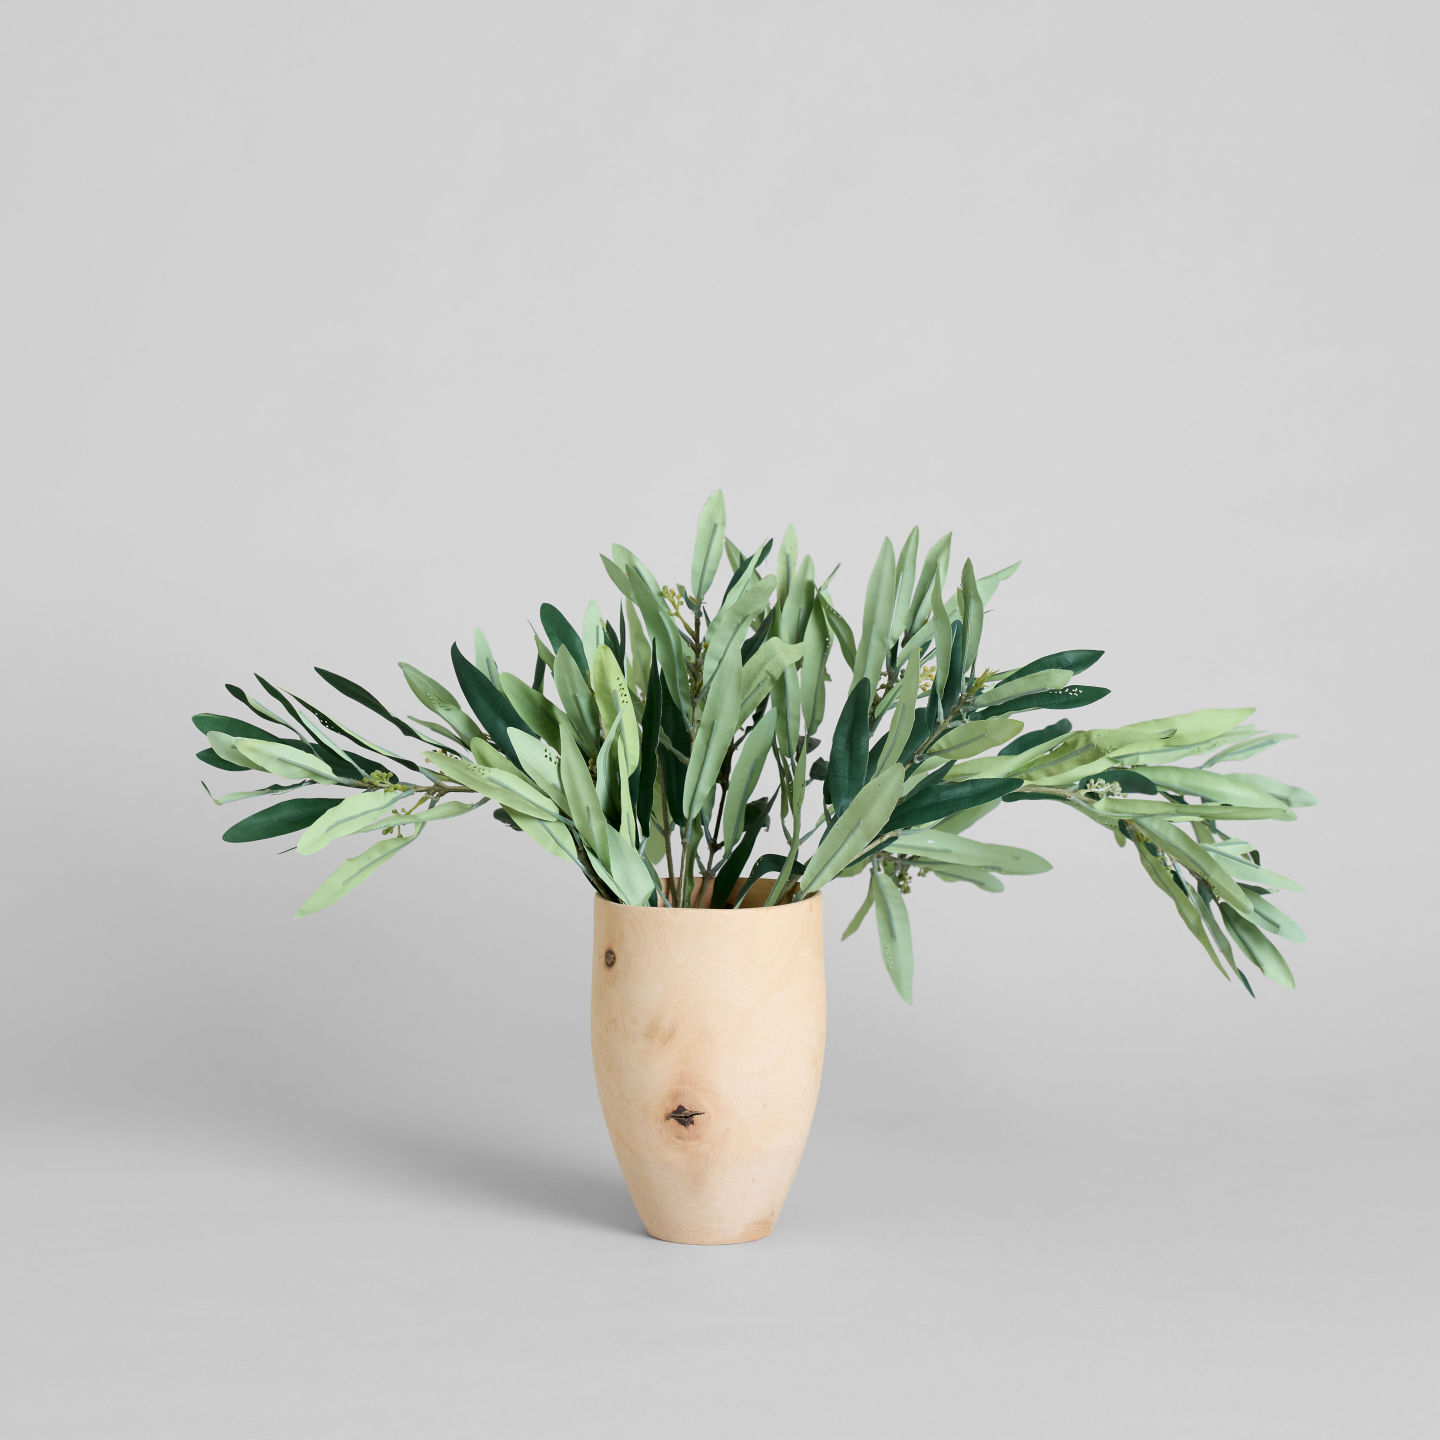 Fake Plants That Promote Wellness Comes with Chic Ceramic Pots and Metal Stands Productivity Office 2 Tabletop Plants Perfect for Home Modern and Realistic Looking Fake Potted Plants